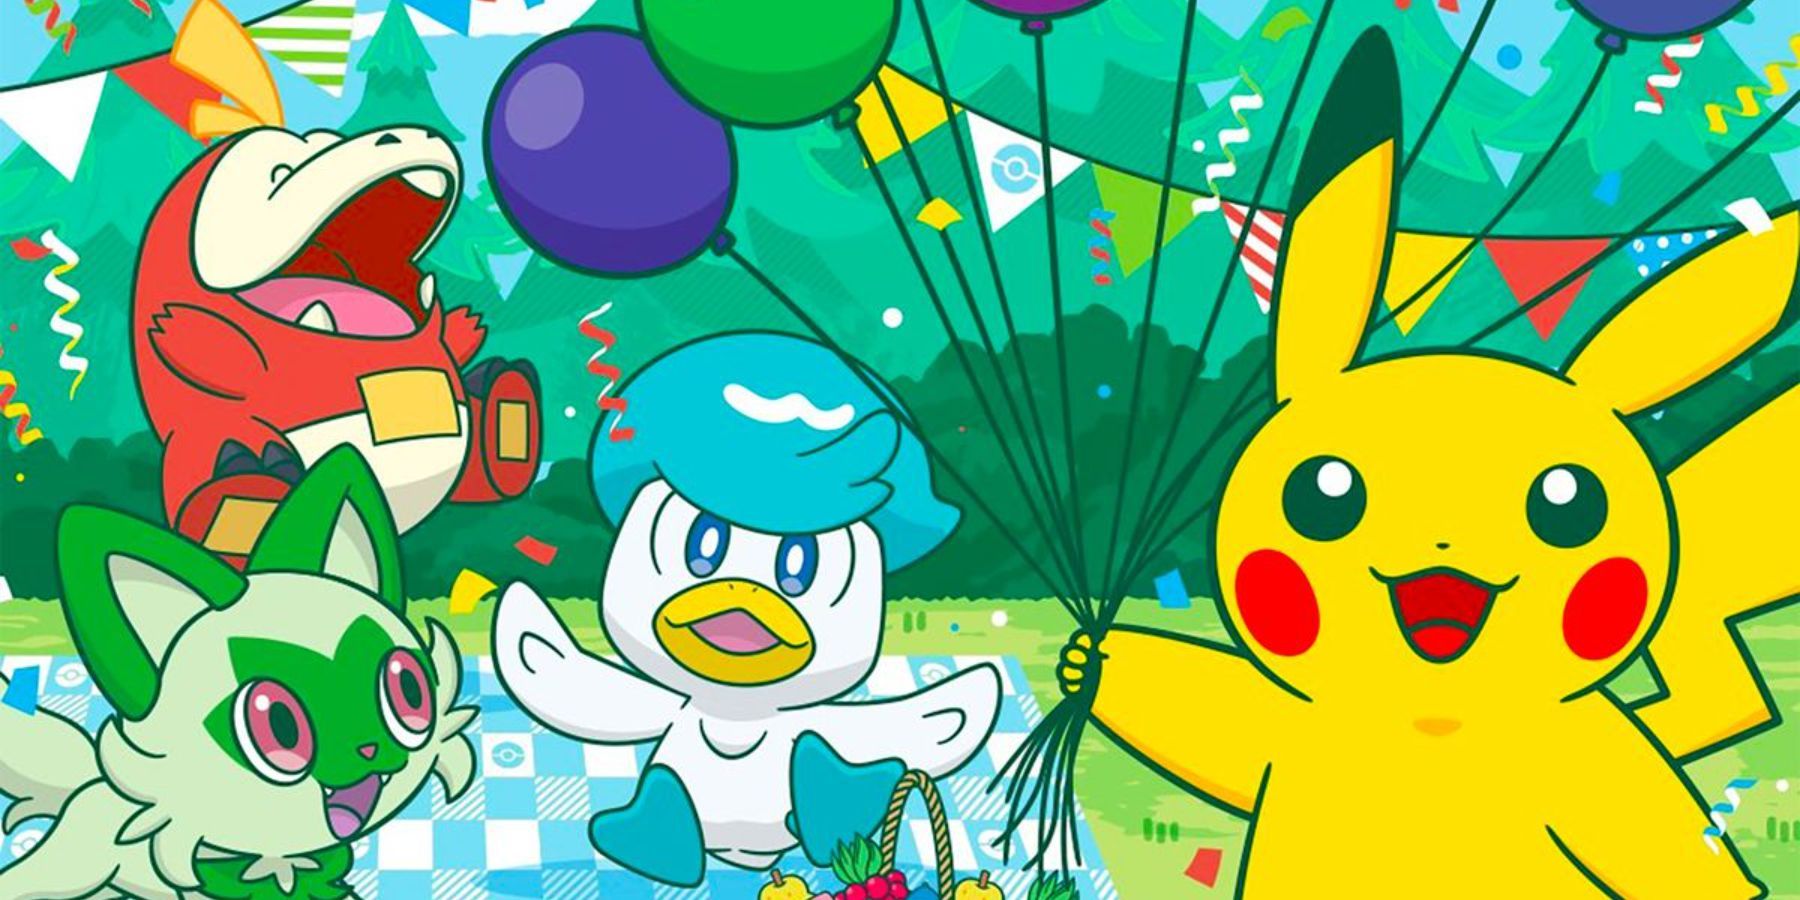 What to Expect From the Rumored August Pokemon Presents